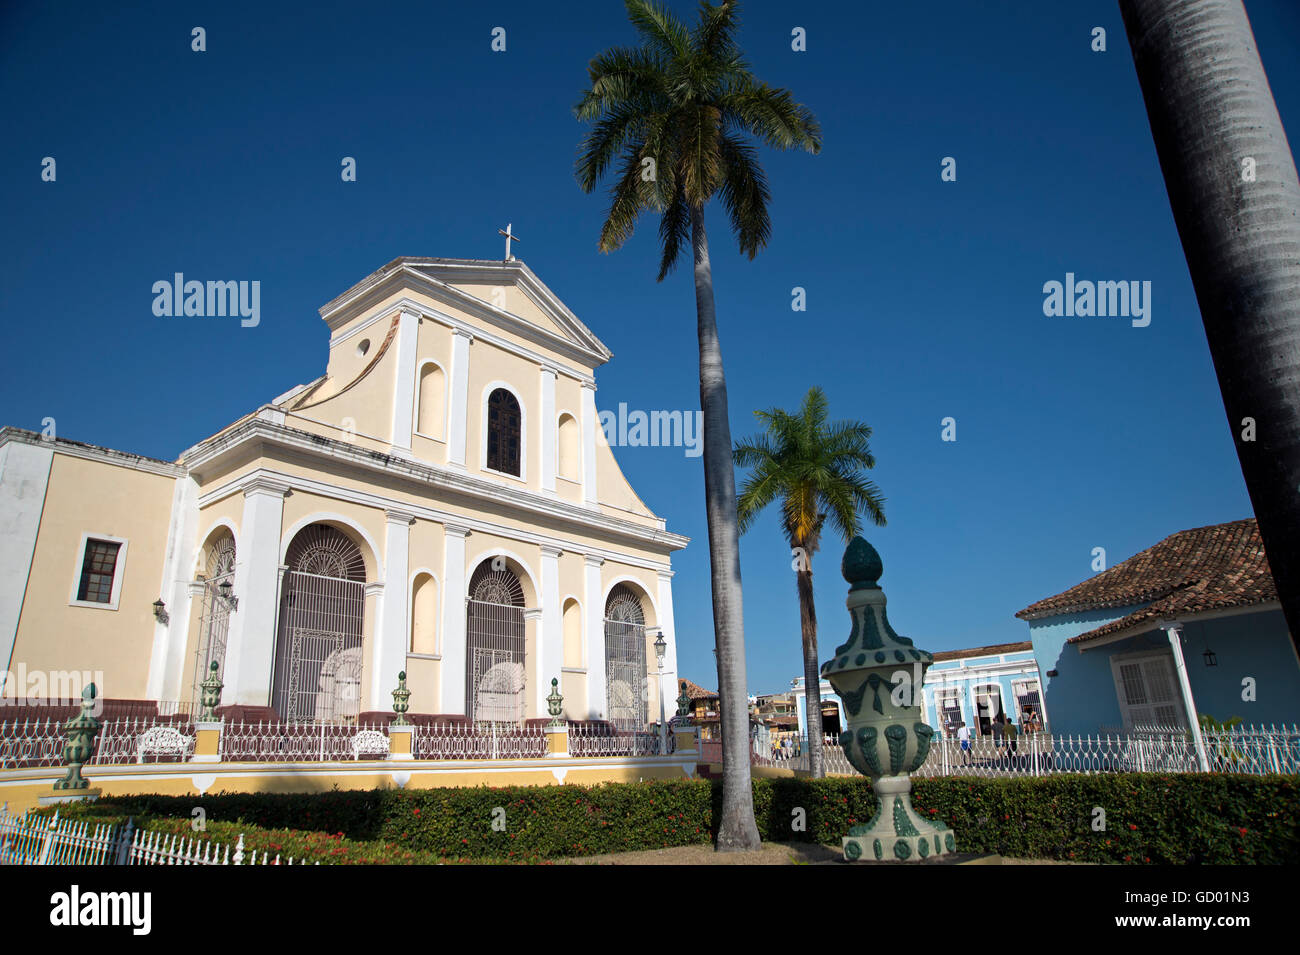 A view of the Iglesia Parroquial de la Santisima church with blue sky and palm trees in the Plaza Mayar Trinidad Cuba Stock Photo